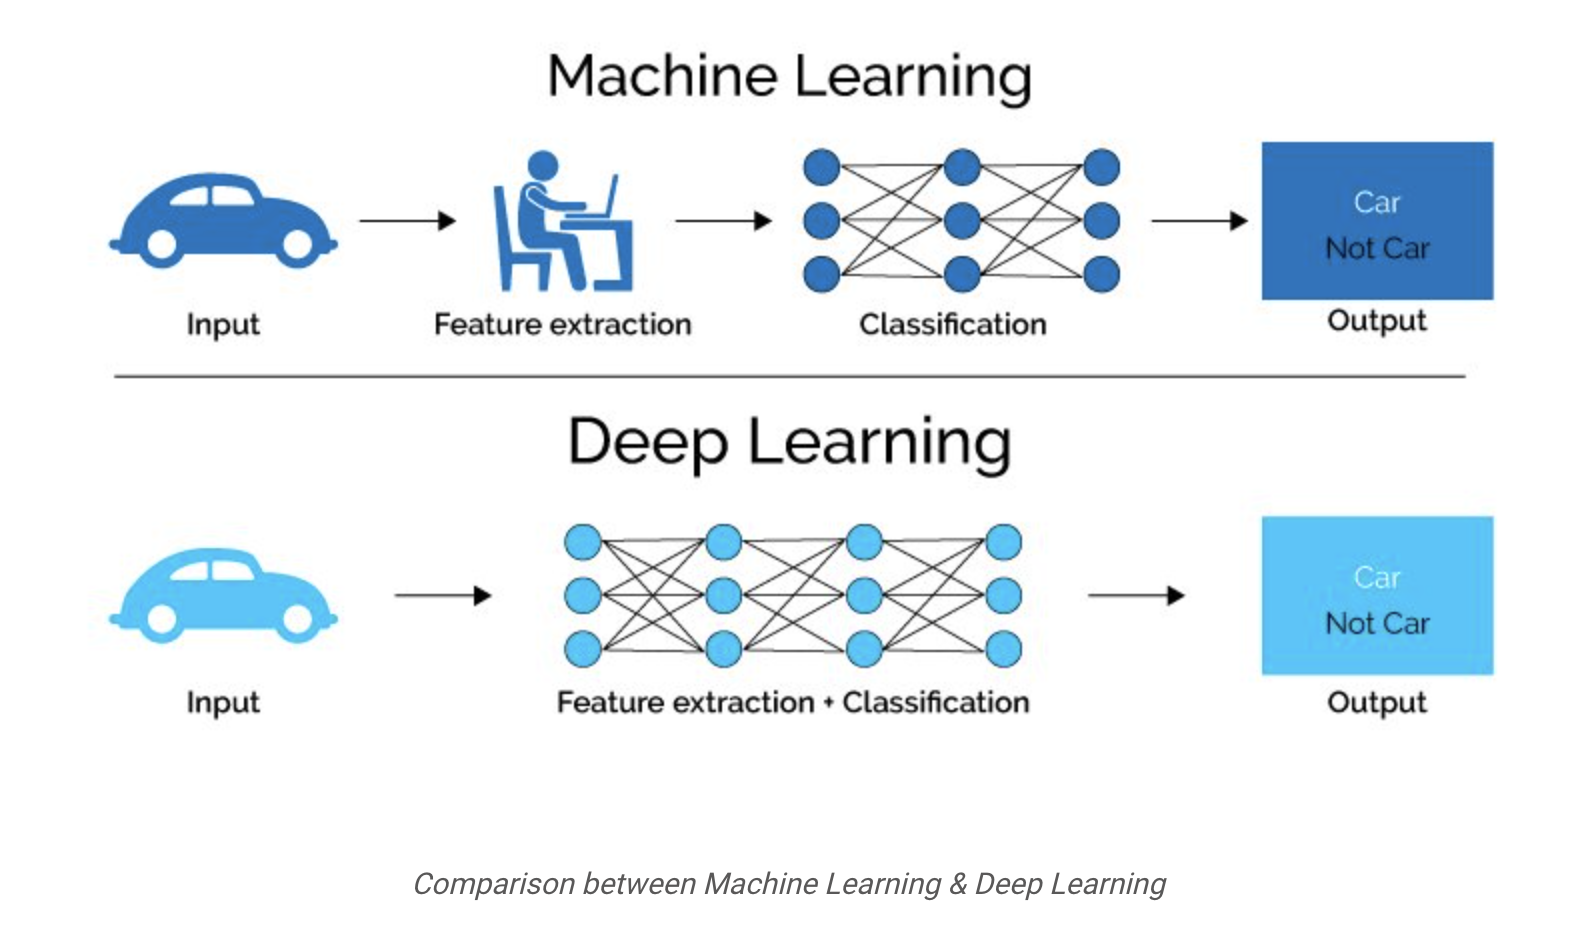 How is deep learning different from traditional machine learning? 